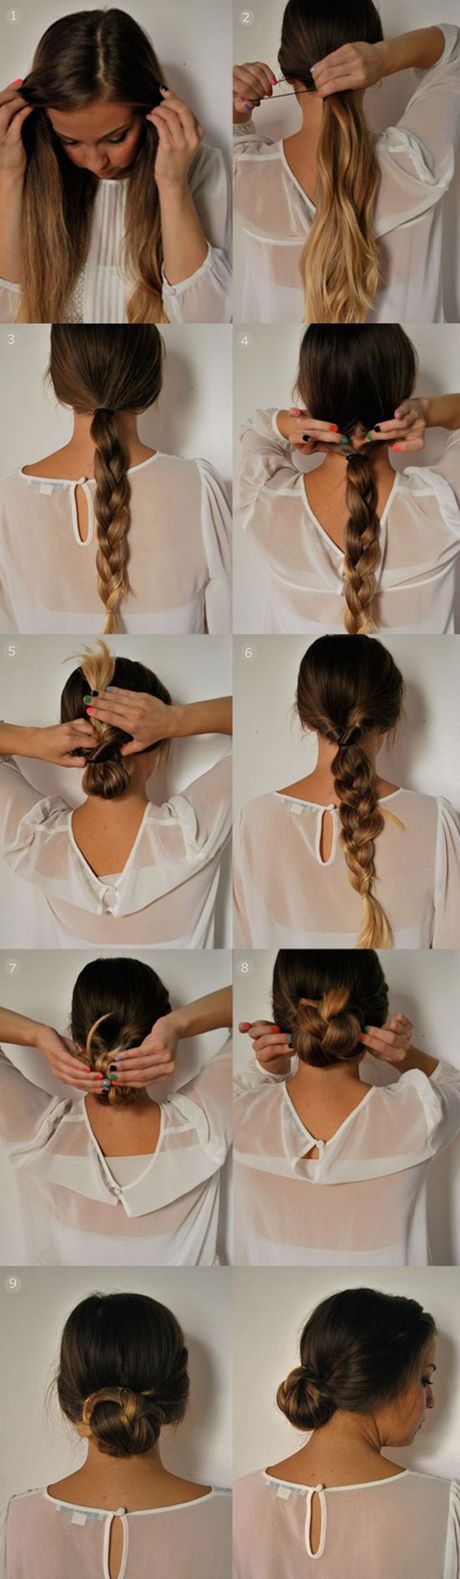 cool-and-easy-hairstyles-for-girls-55 Cool and easy hairstyles for girls